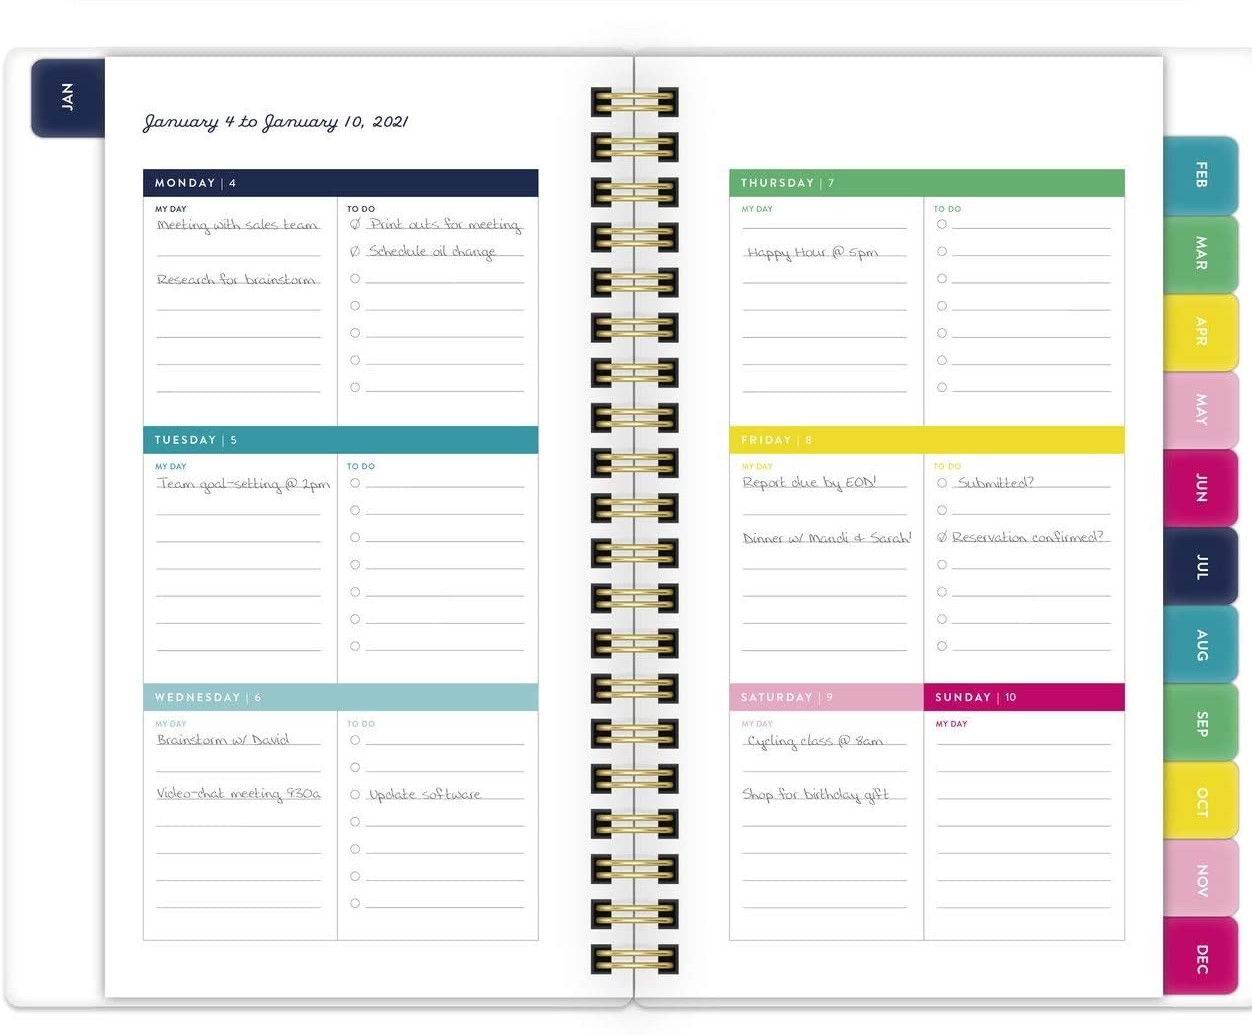 Inside the Simplified Pocket Planner - One Week, each day highlighted with a different color.